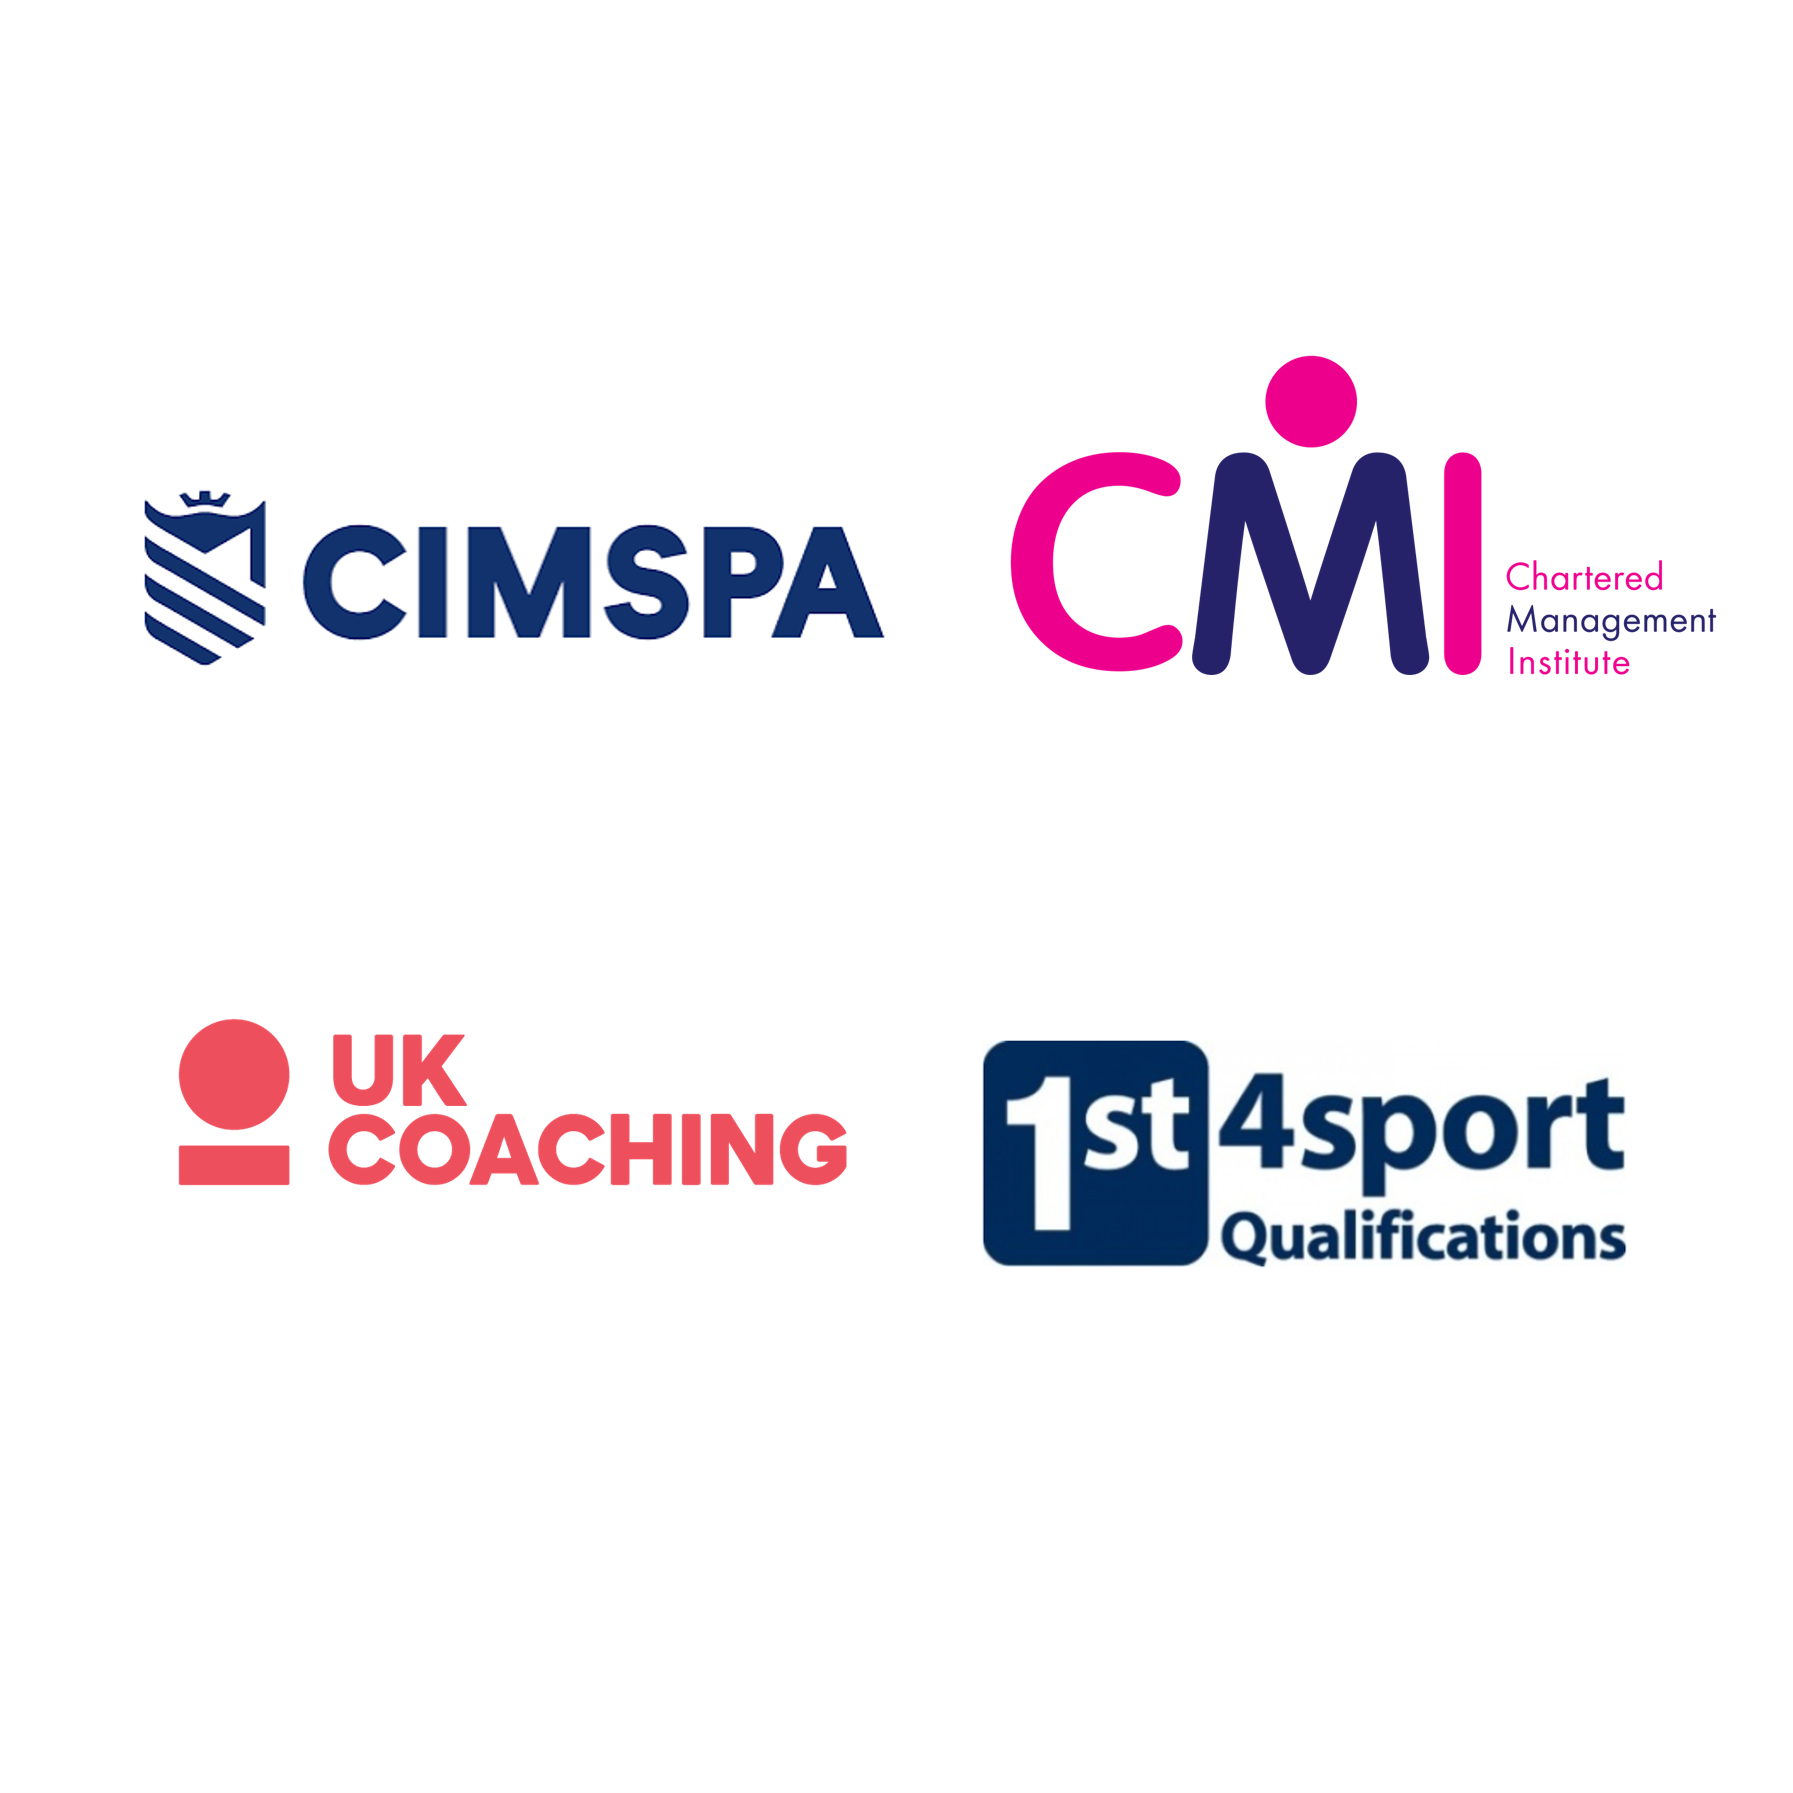 Our Partners, CIMSPA, CMI, UK Coaching, 1st 4 Sport Qualifications and many more